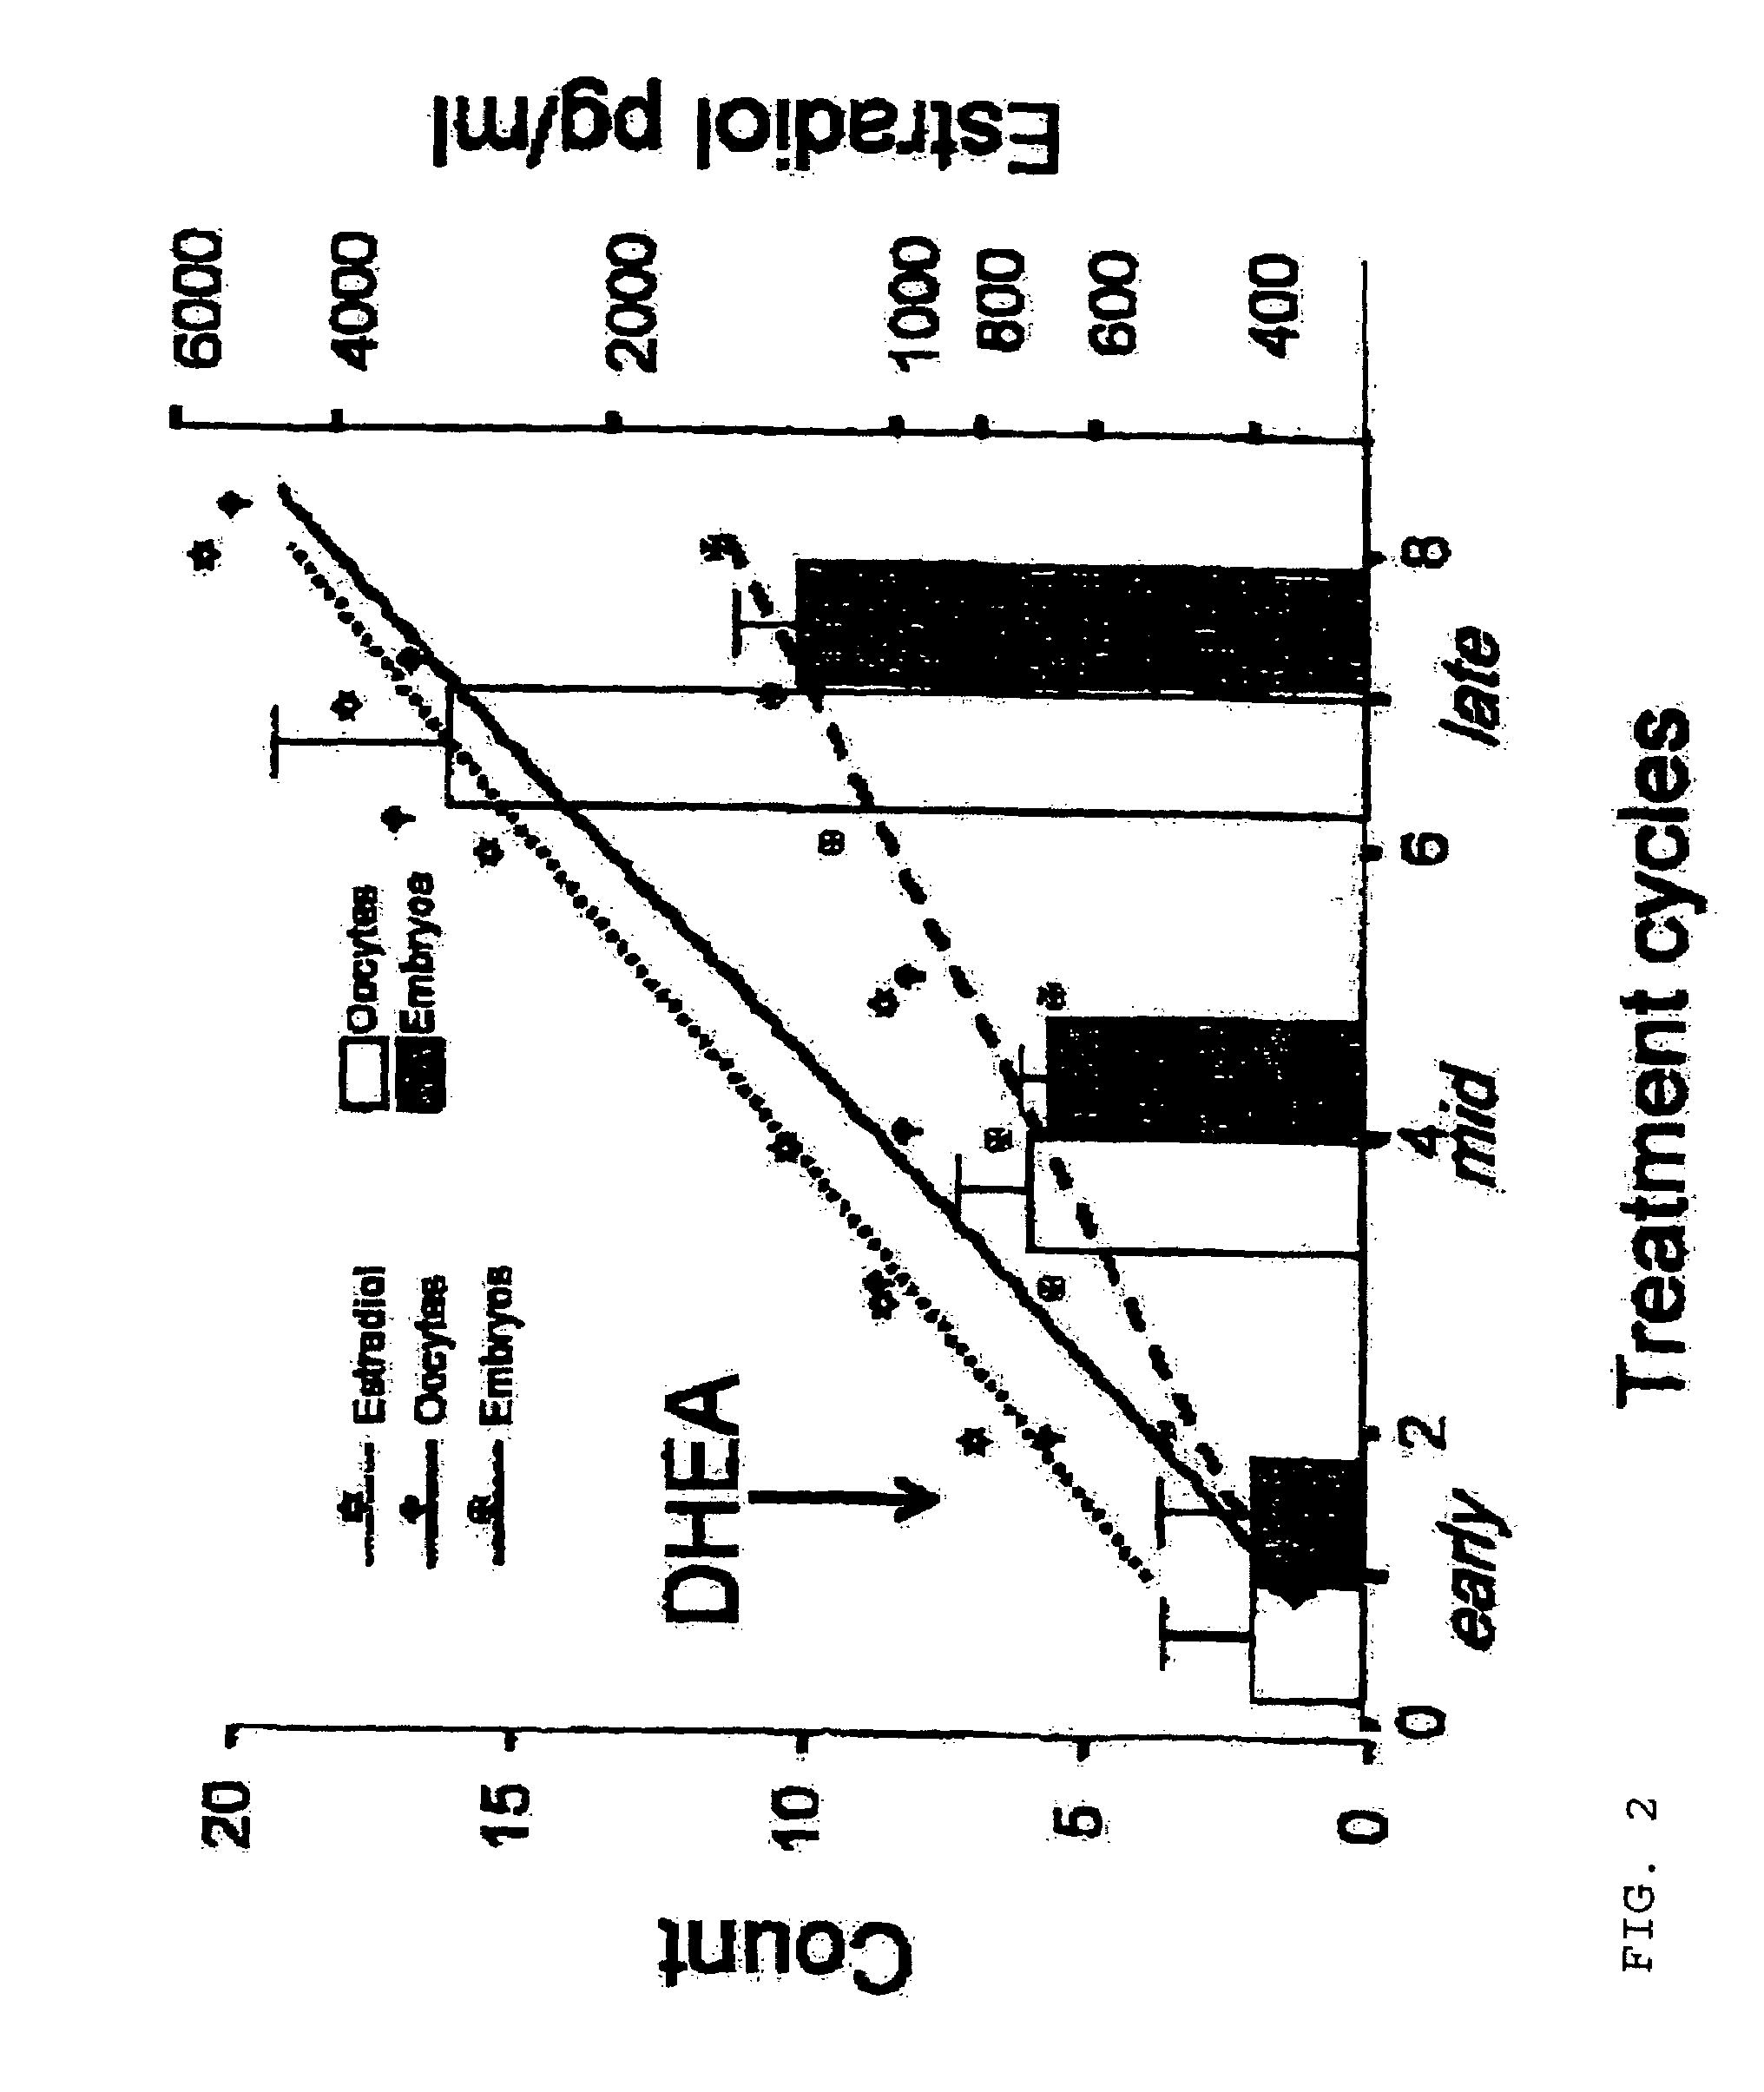 Method of improving cumulative embryo score and quantity of fertilized oocytes, increasing euploidy rate and of normalizing ovarian function using an androgen such as dehydroepiandrosterone